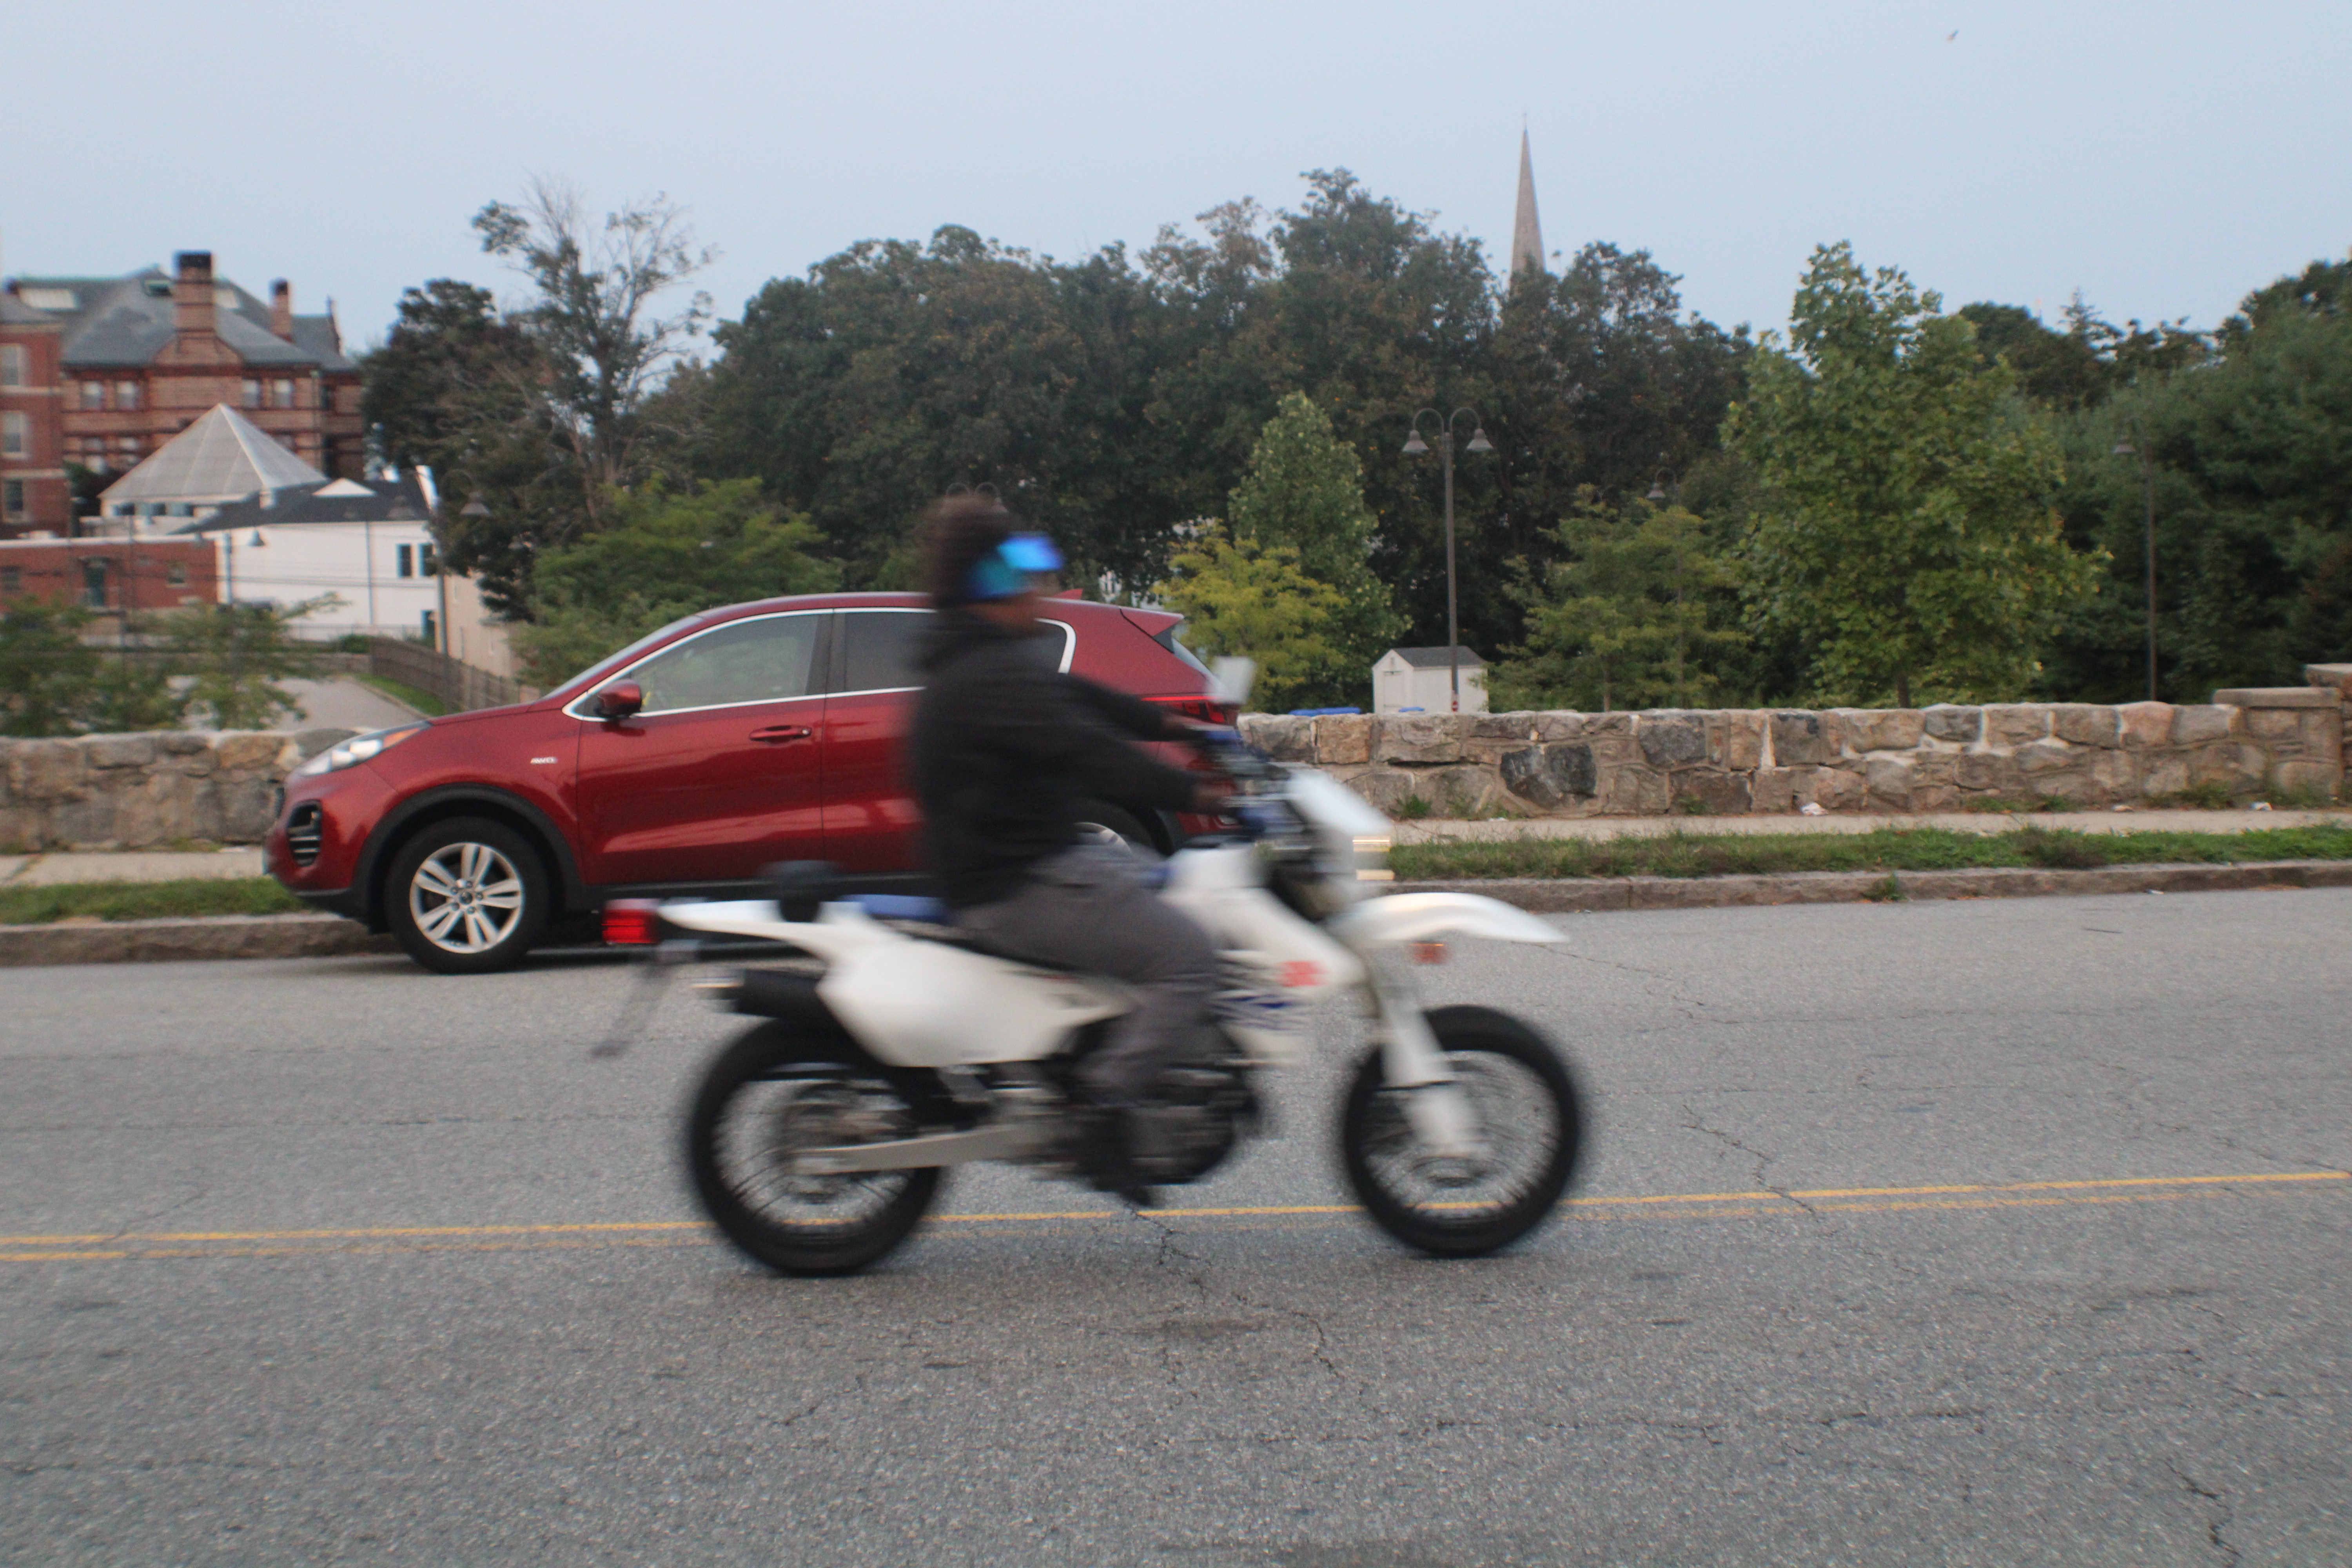 A man speeding by on a motor cycle